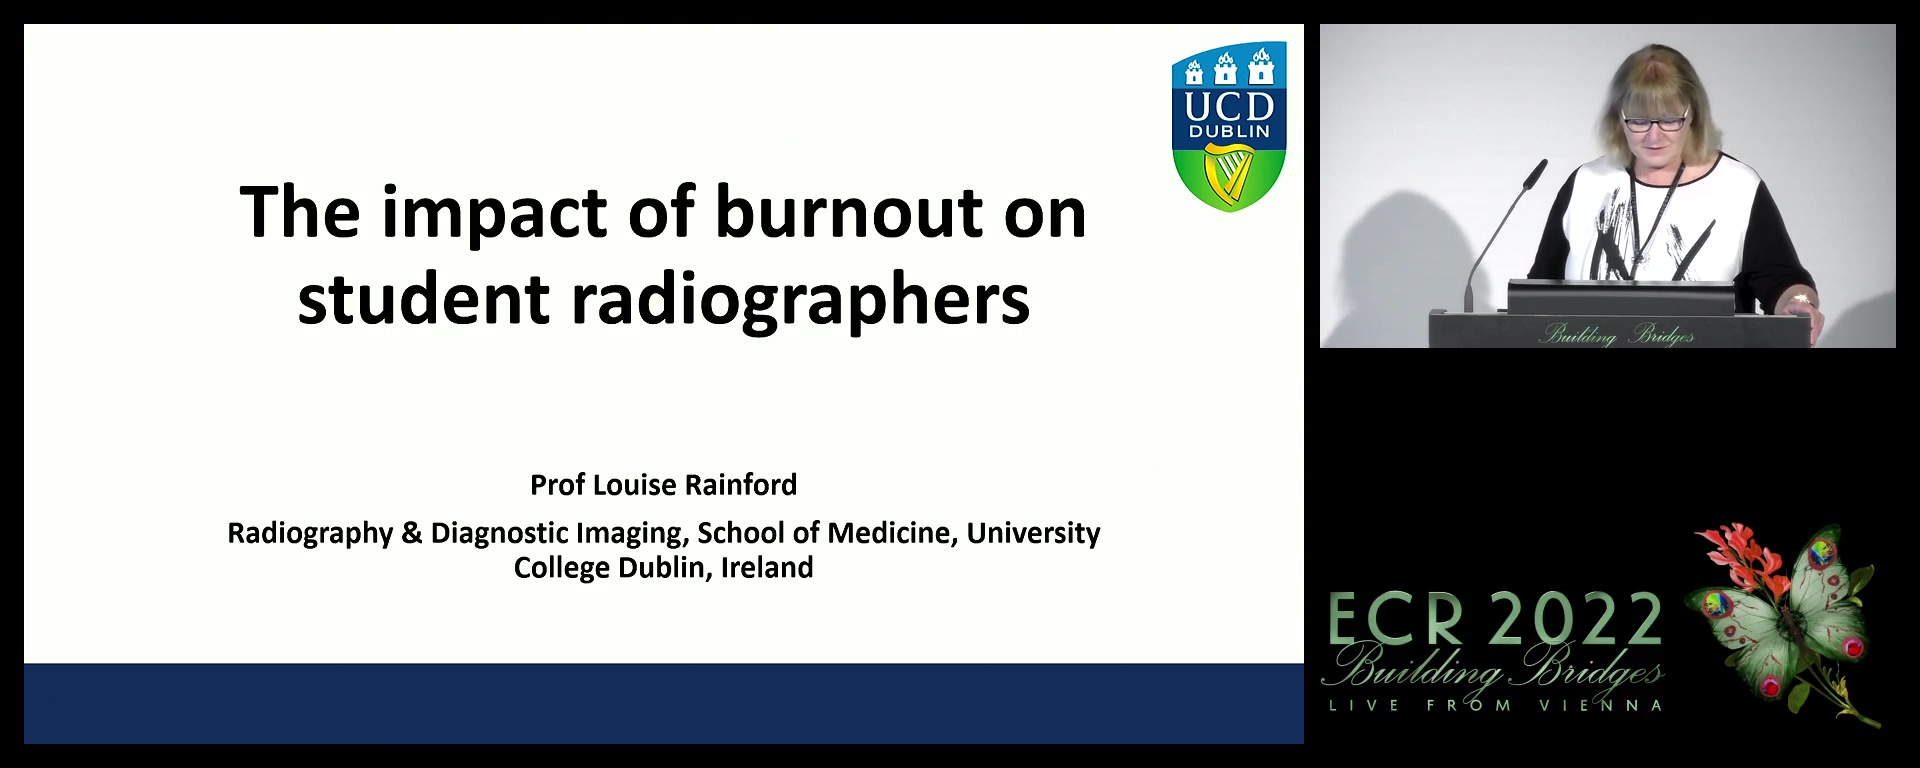 The impact of burnout on student radiographers